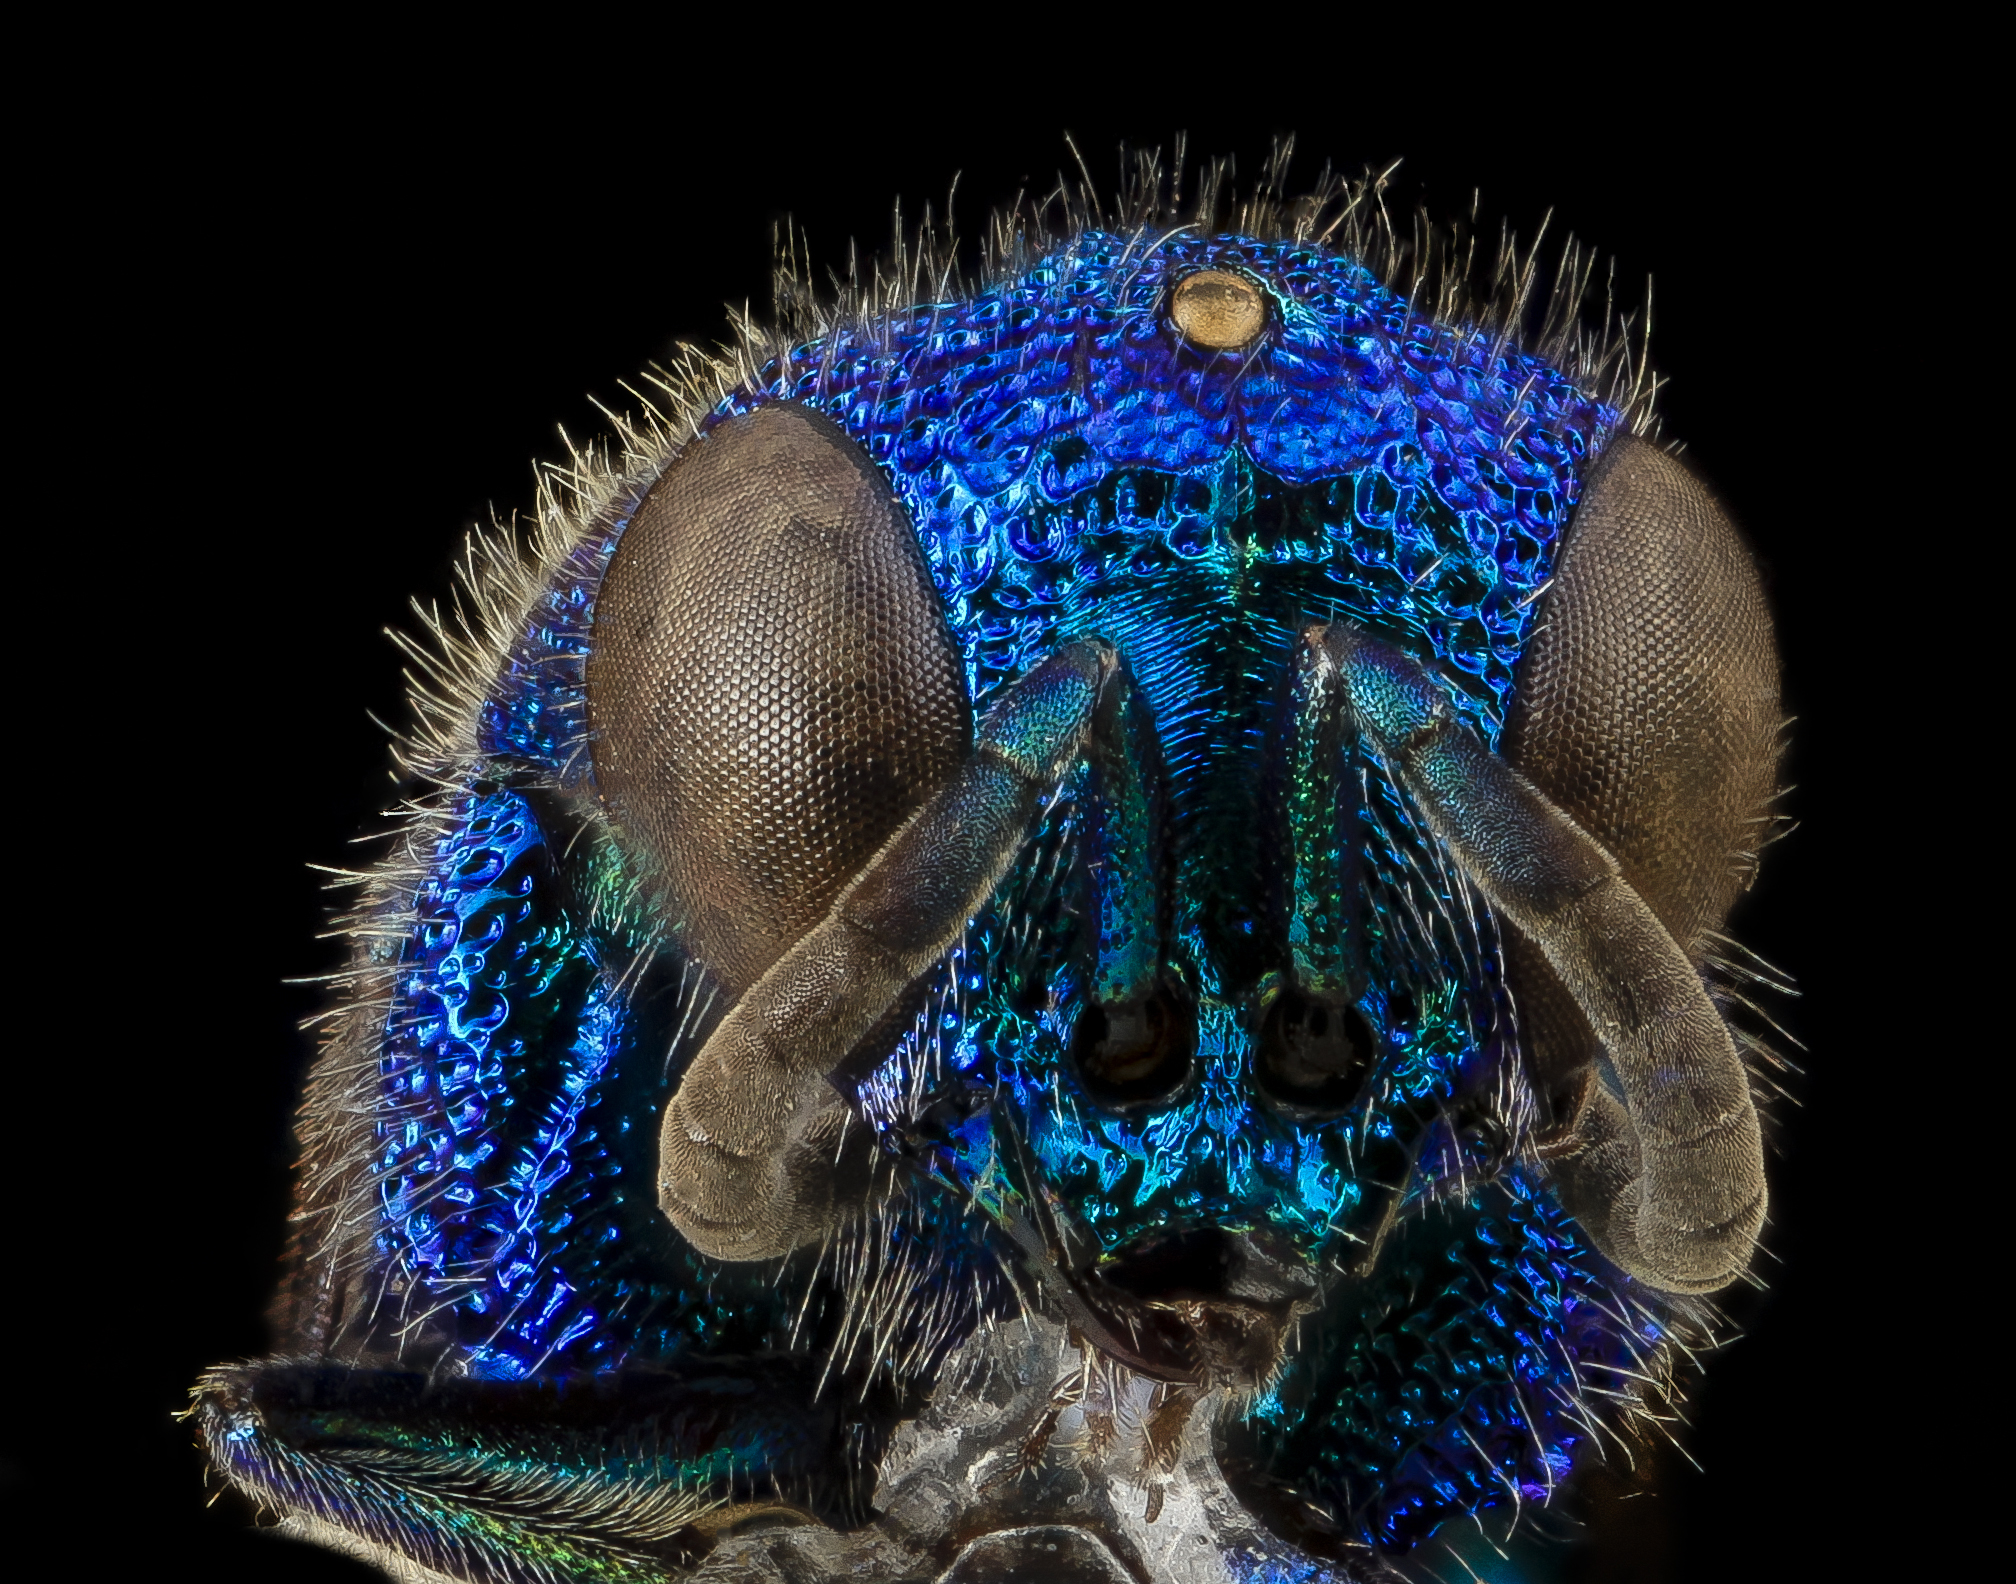 Chrysis propria Aaron, U, Face, MD, Baltimore County 2014-03-11-17.48.38 ZS PMax (13612673664)